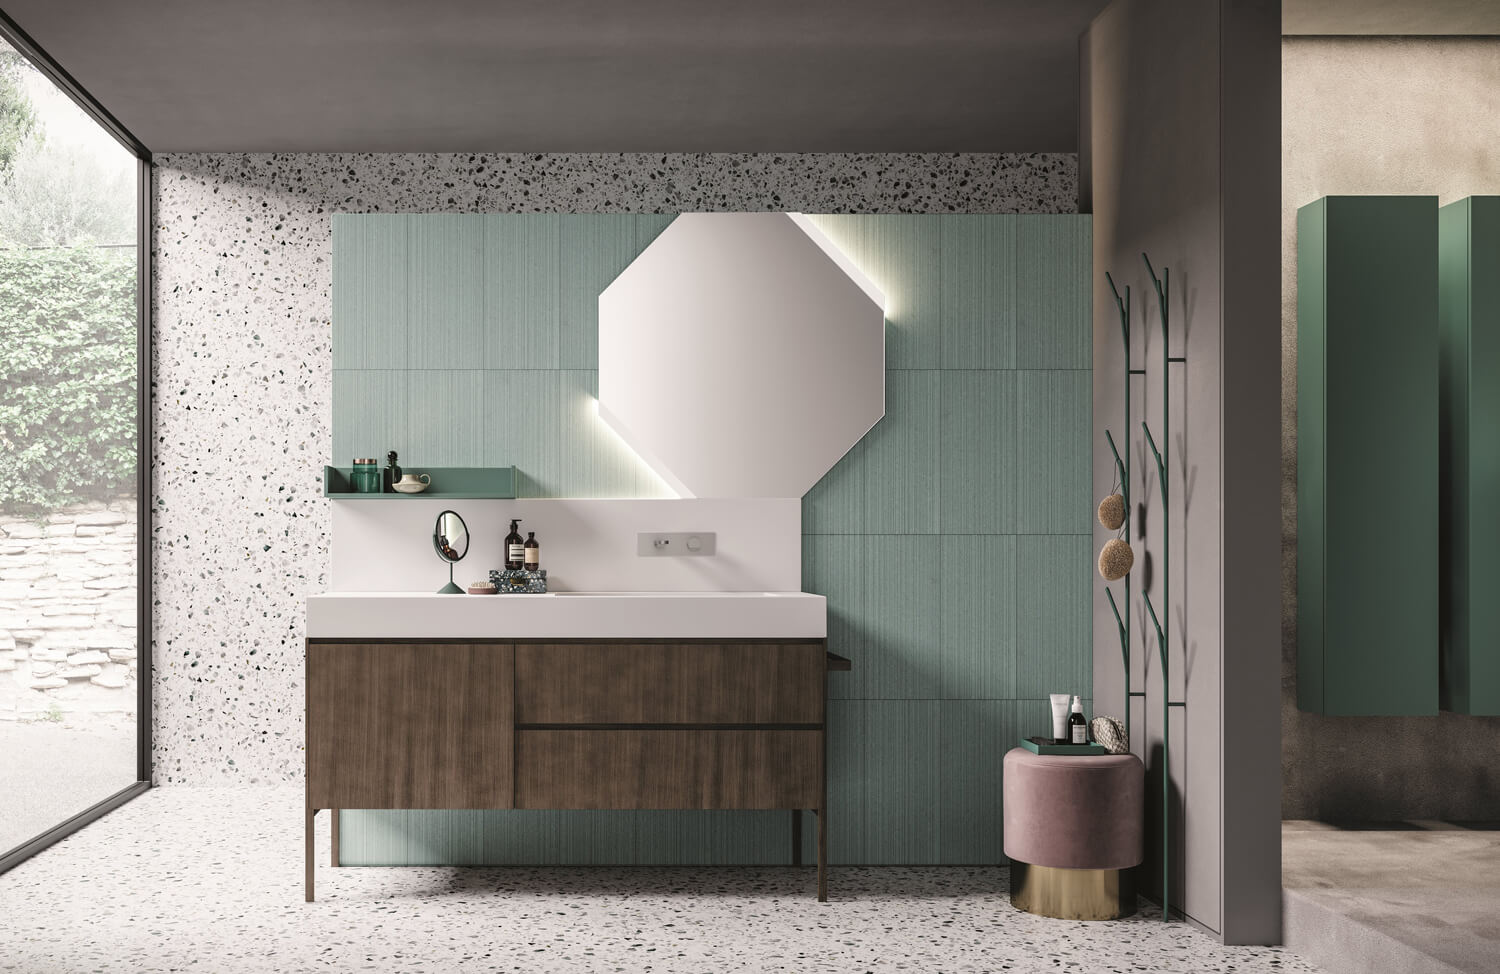 The versatility of Calix allows you to design personalized bathroom environments by playing with shapes, colors, and textures. 